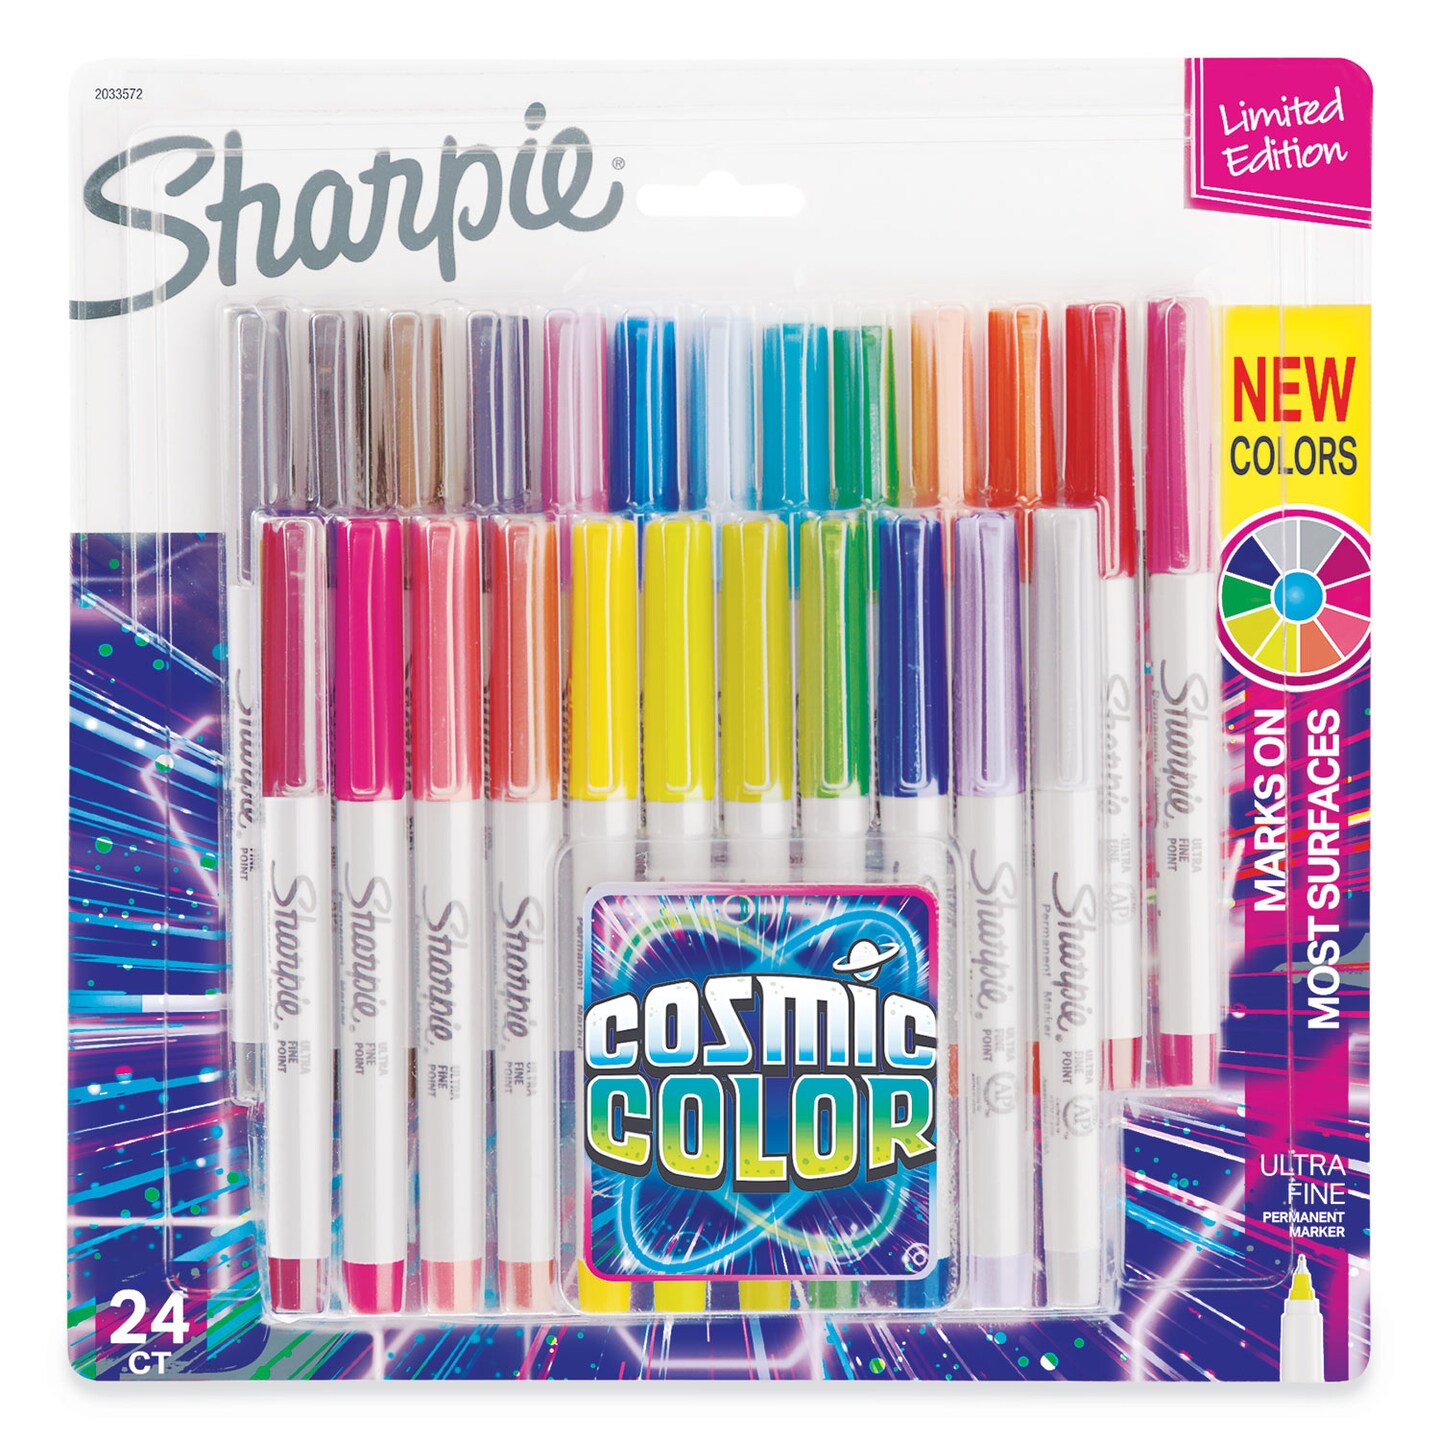 Sharpie Cosmic Color Permanent Markers, Extra-Fine Needle Tip